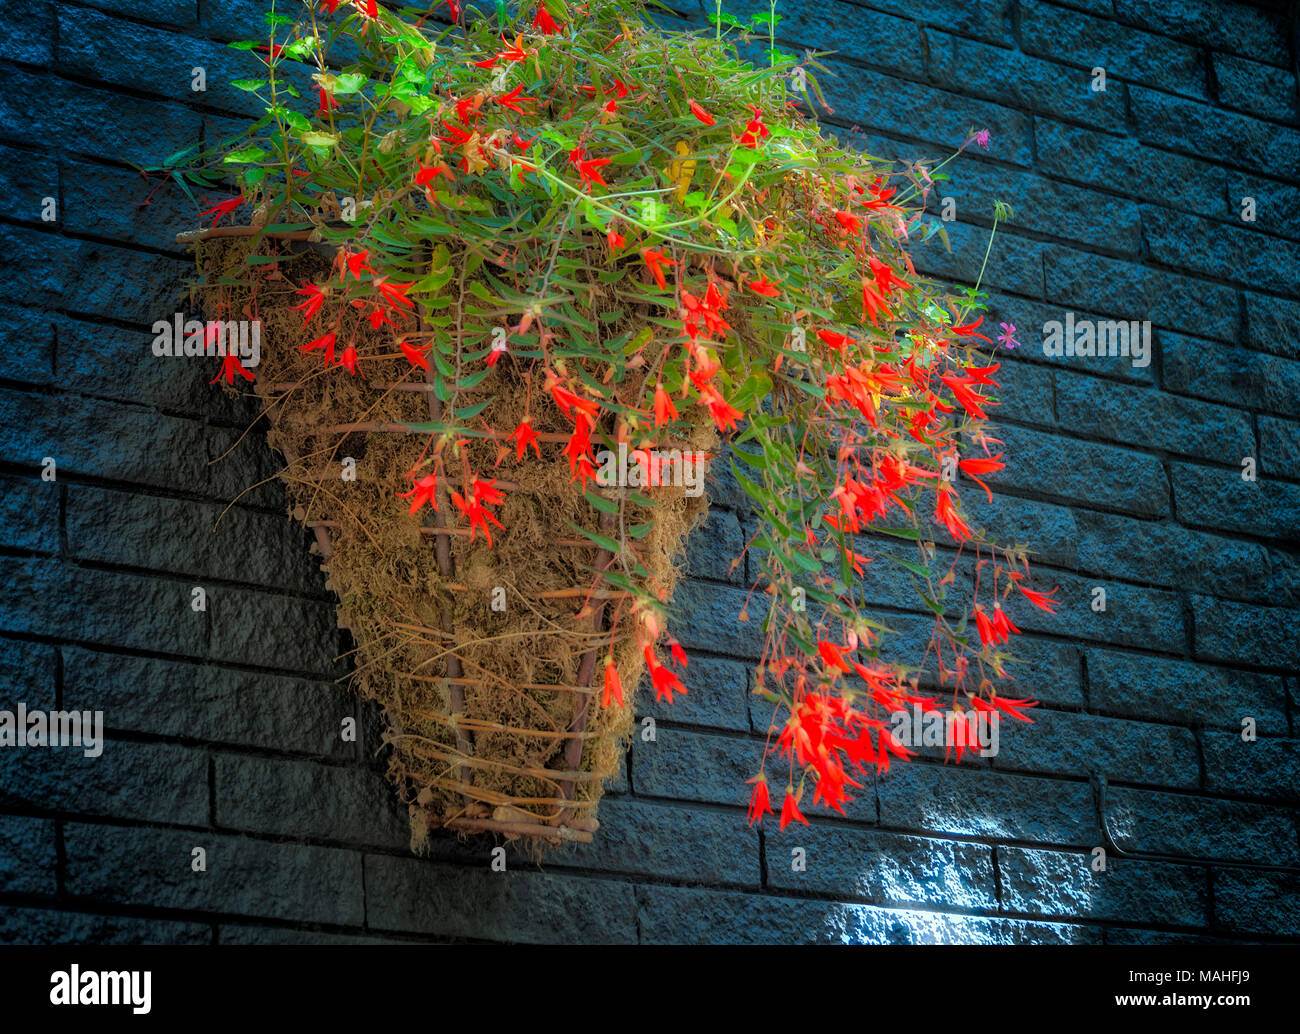 Delicate orange blossoms and green leaves hang gently over a wall basket accenting a dark gray brick wall. Stock Photo